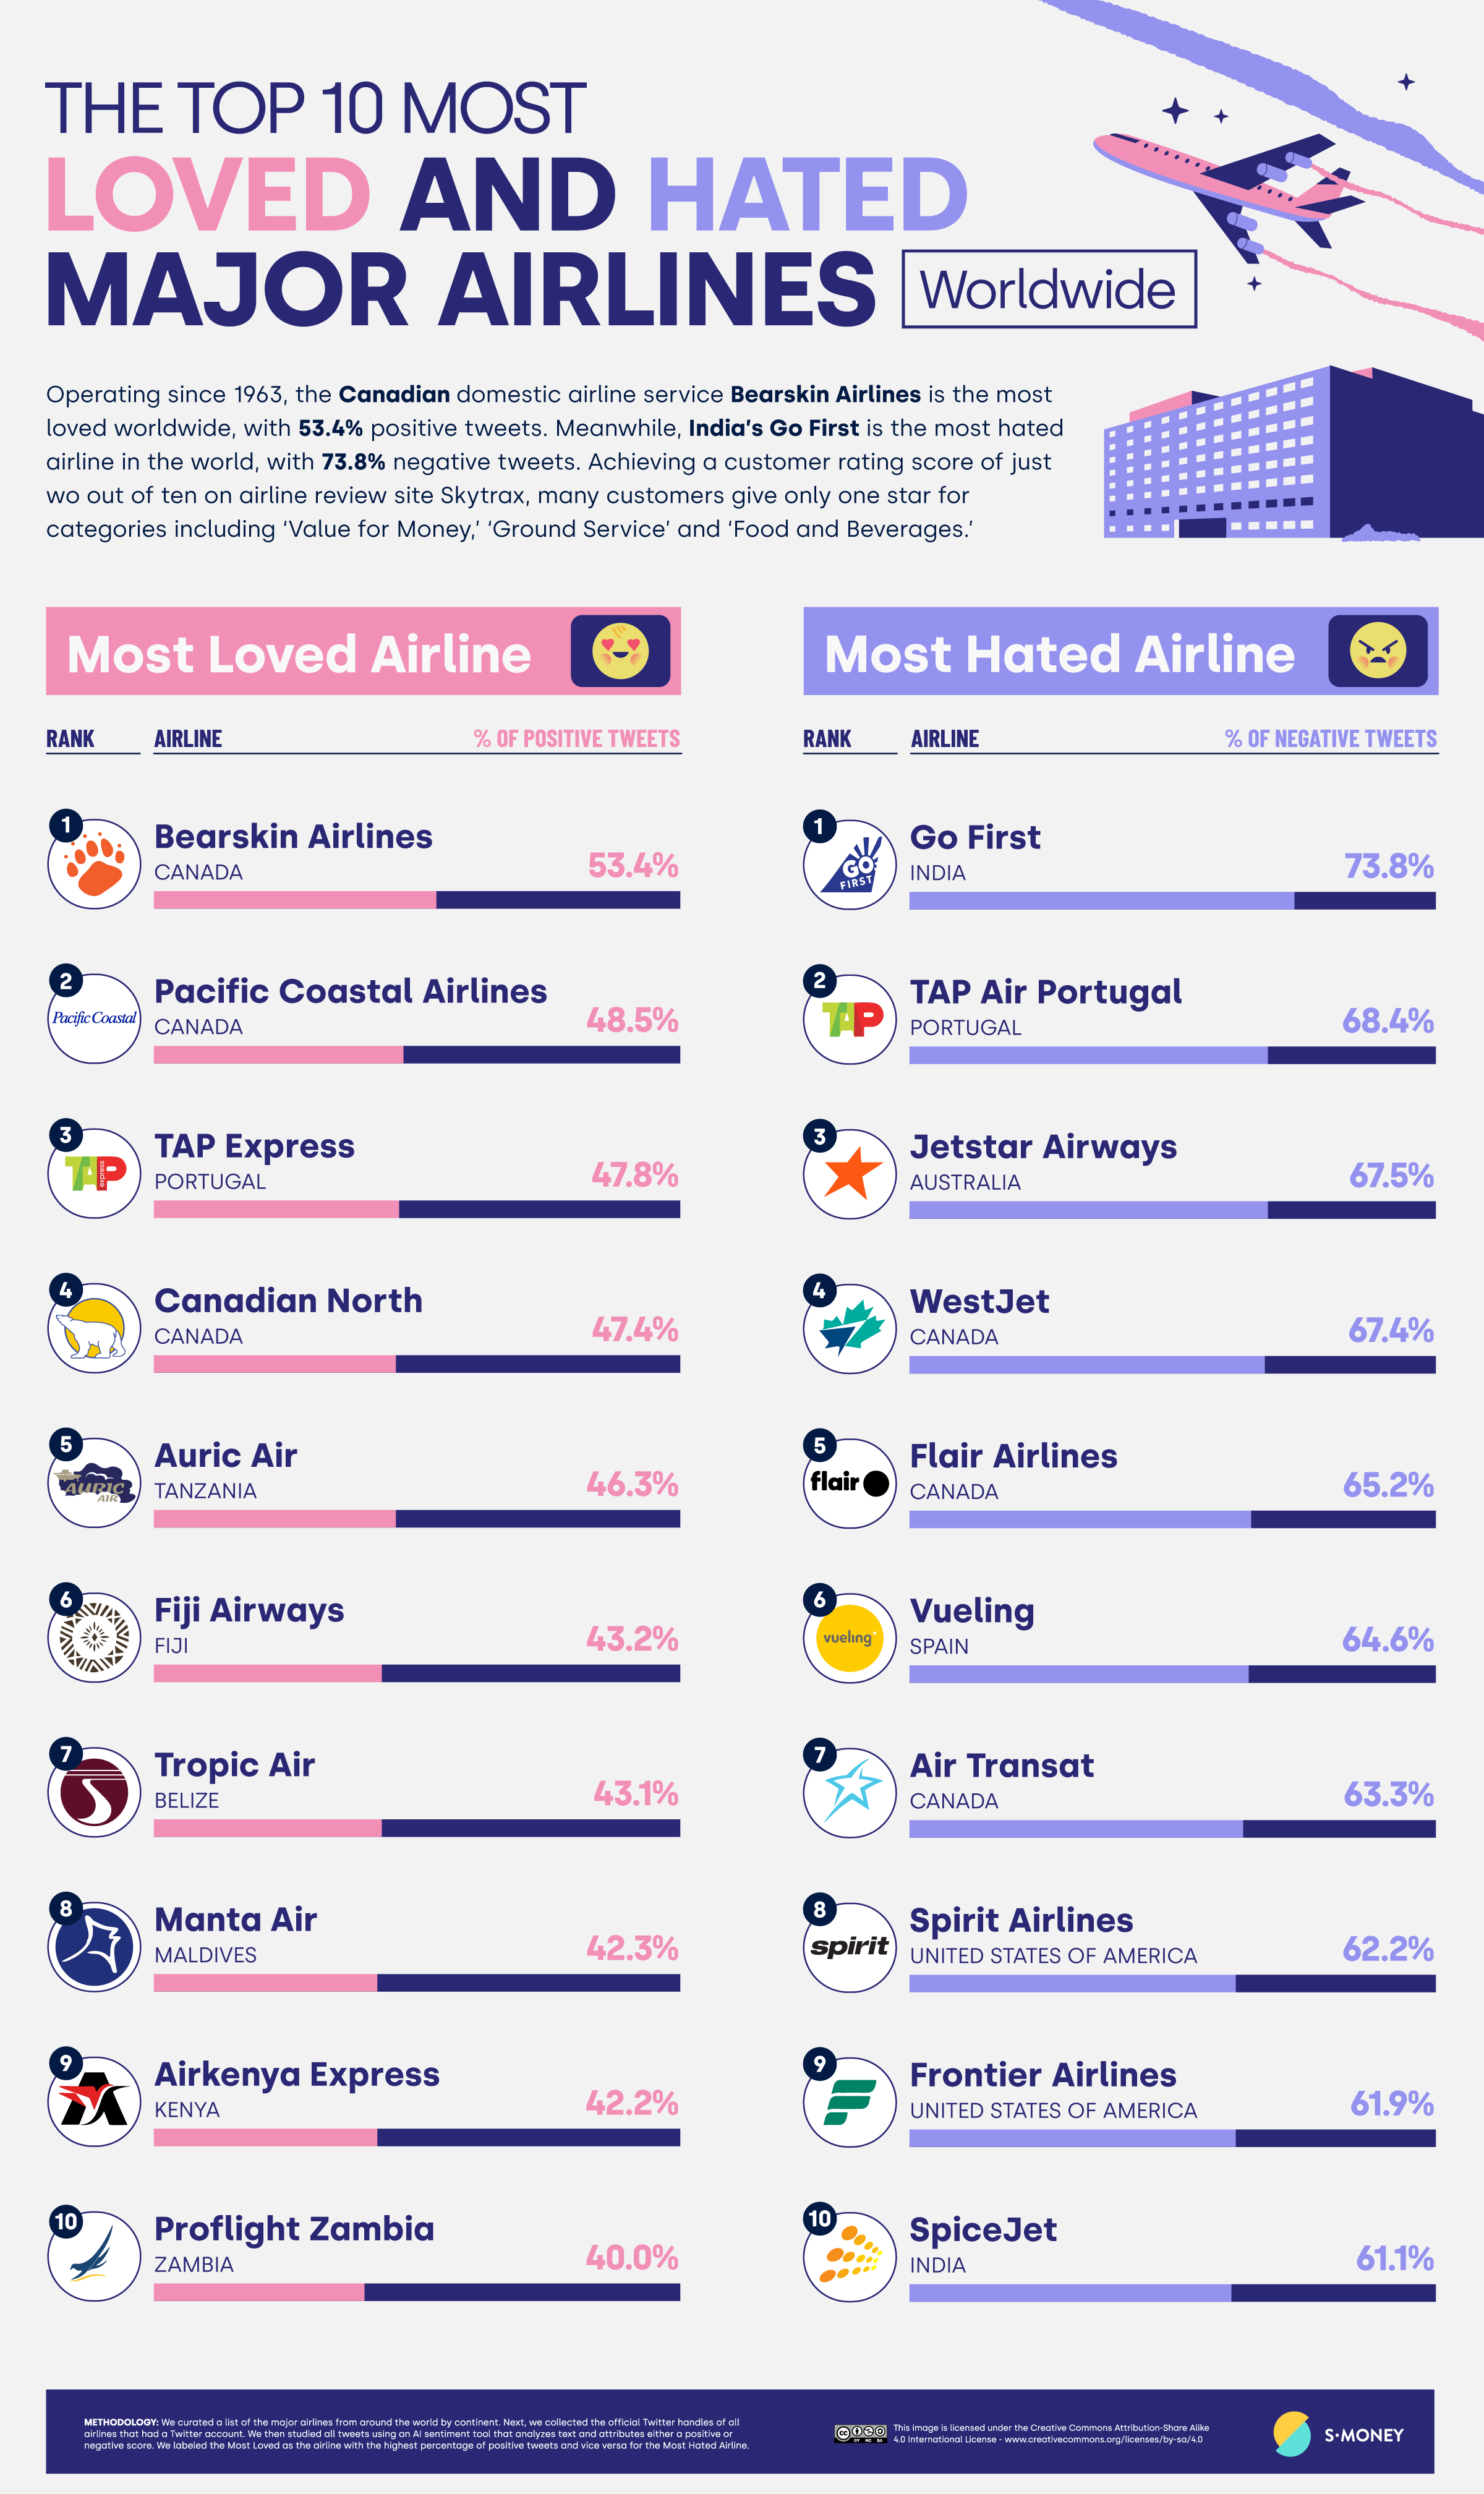 The Most Loved and Hated Airlines Worldwide